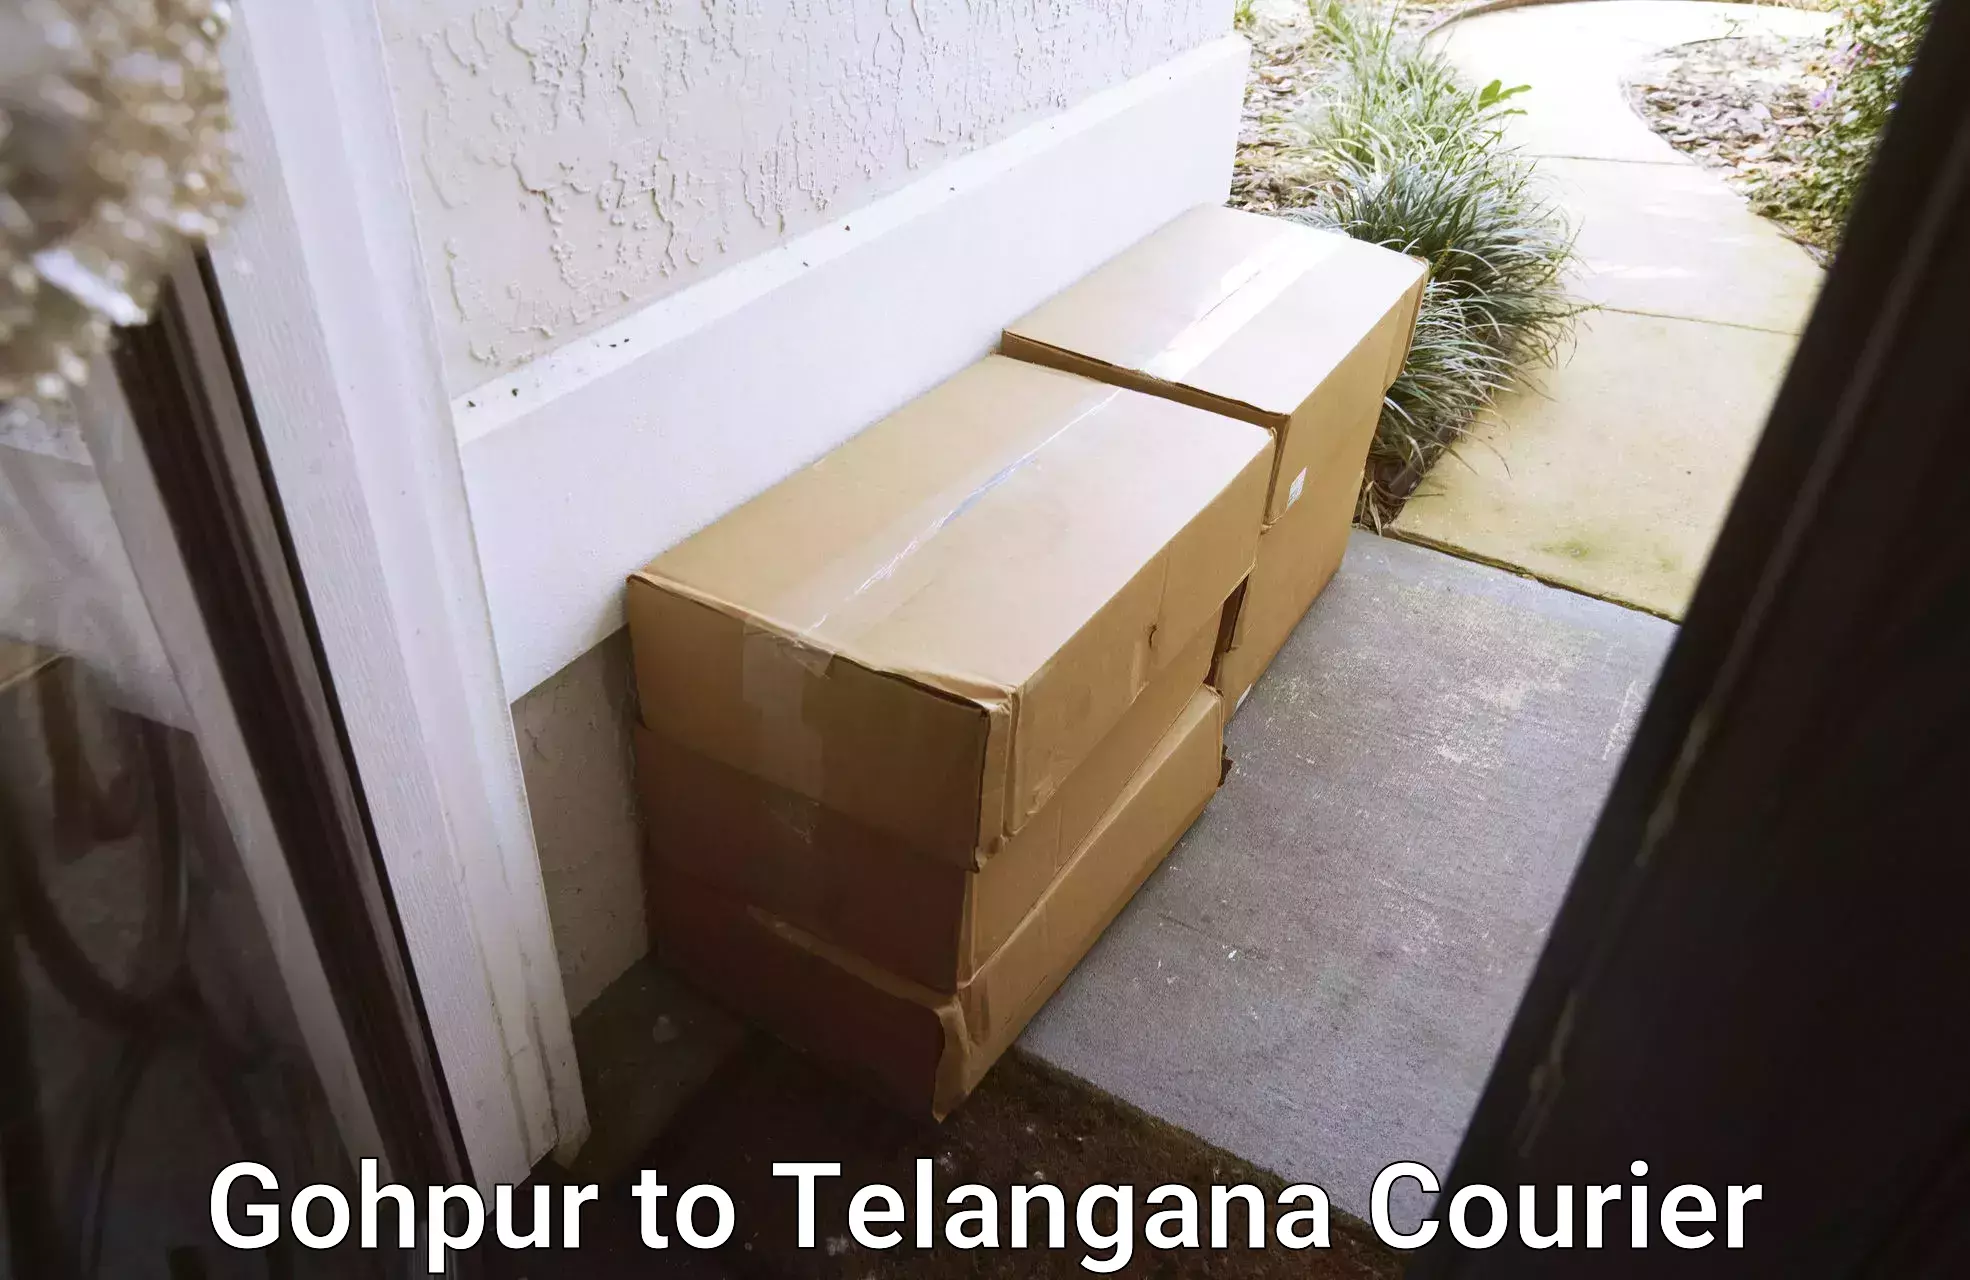 High-priority parcel service Gohpur to Hyderabad